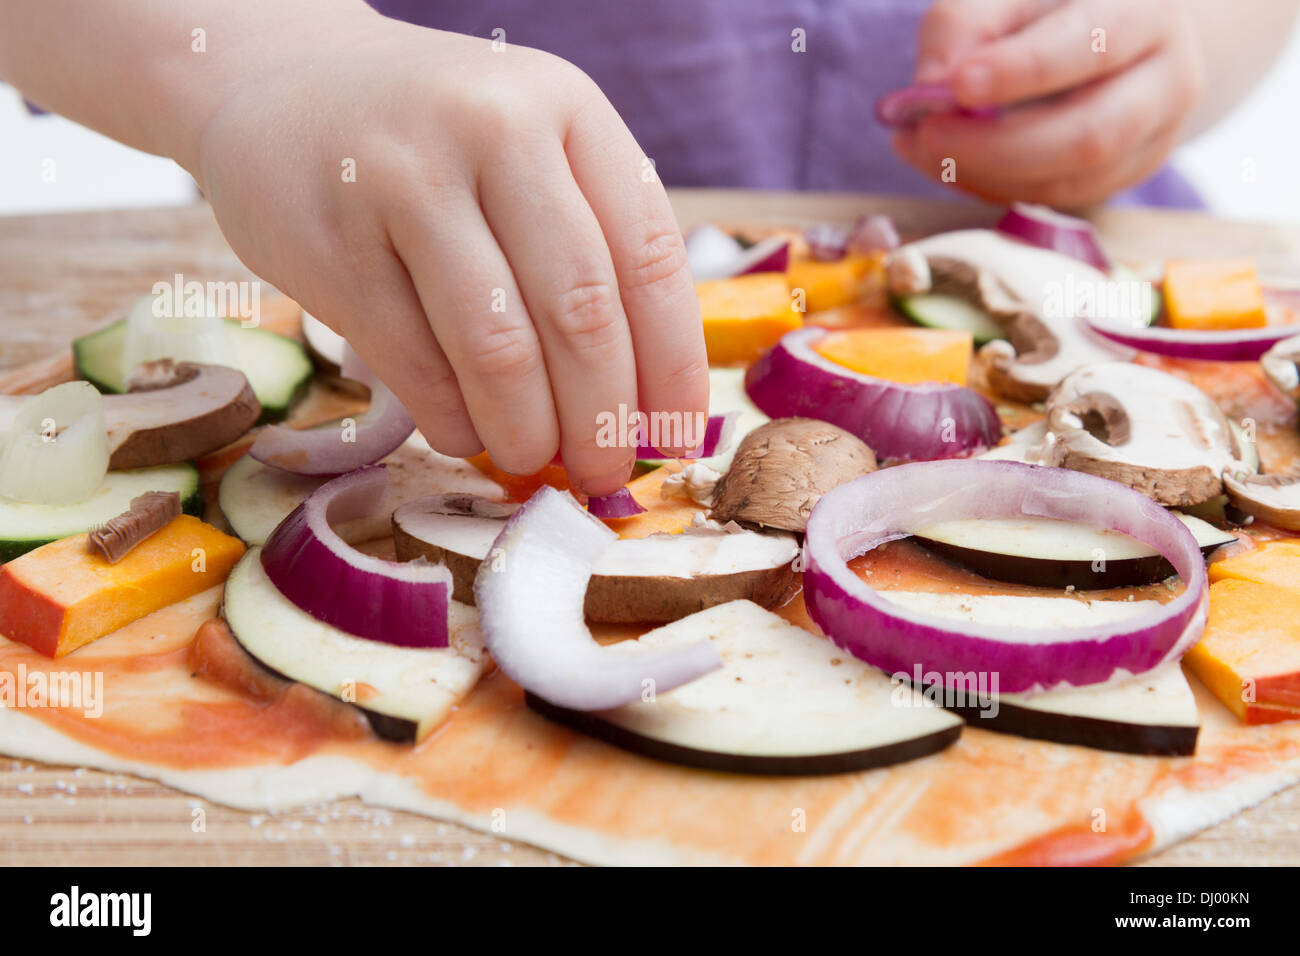 small hands preparing fresh pizza with many vegetables Stock Photo